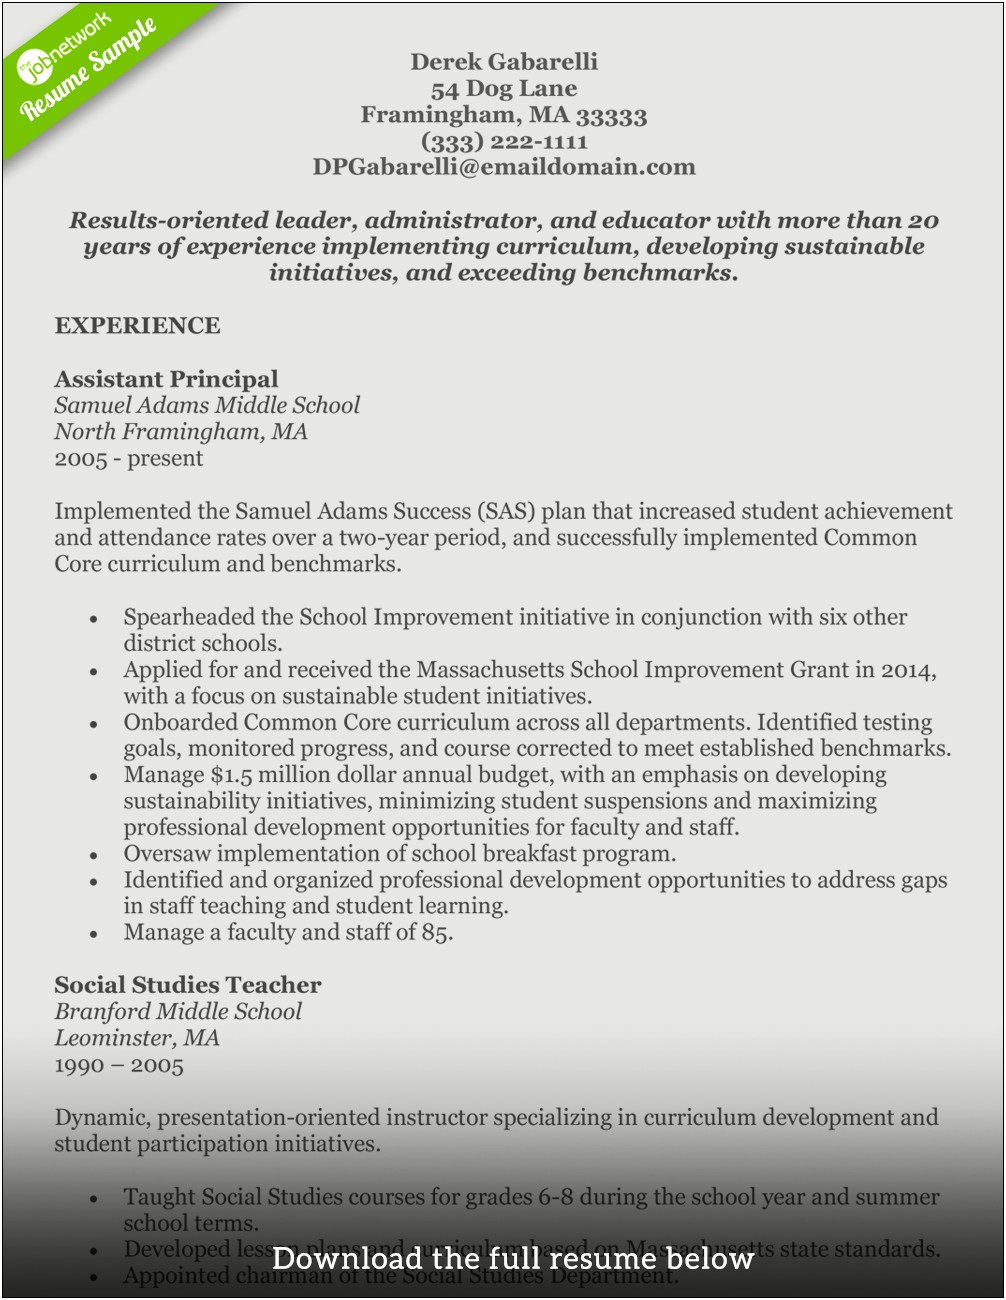 Teaching Resume For Teacher With Years Of Experience